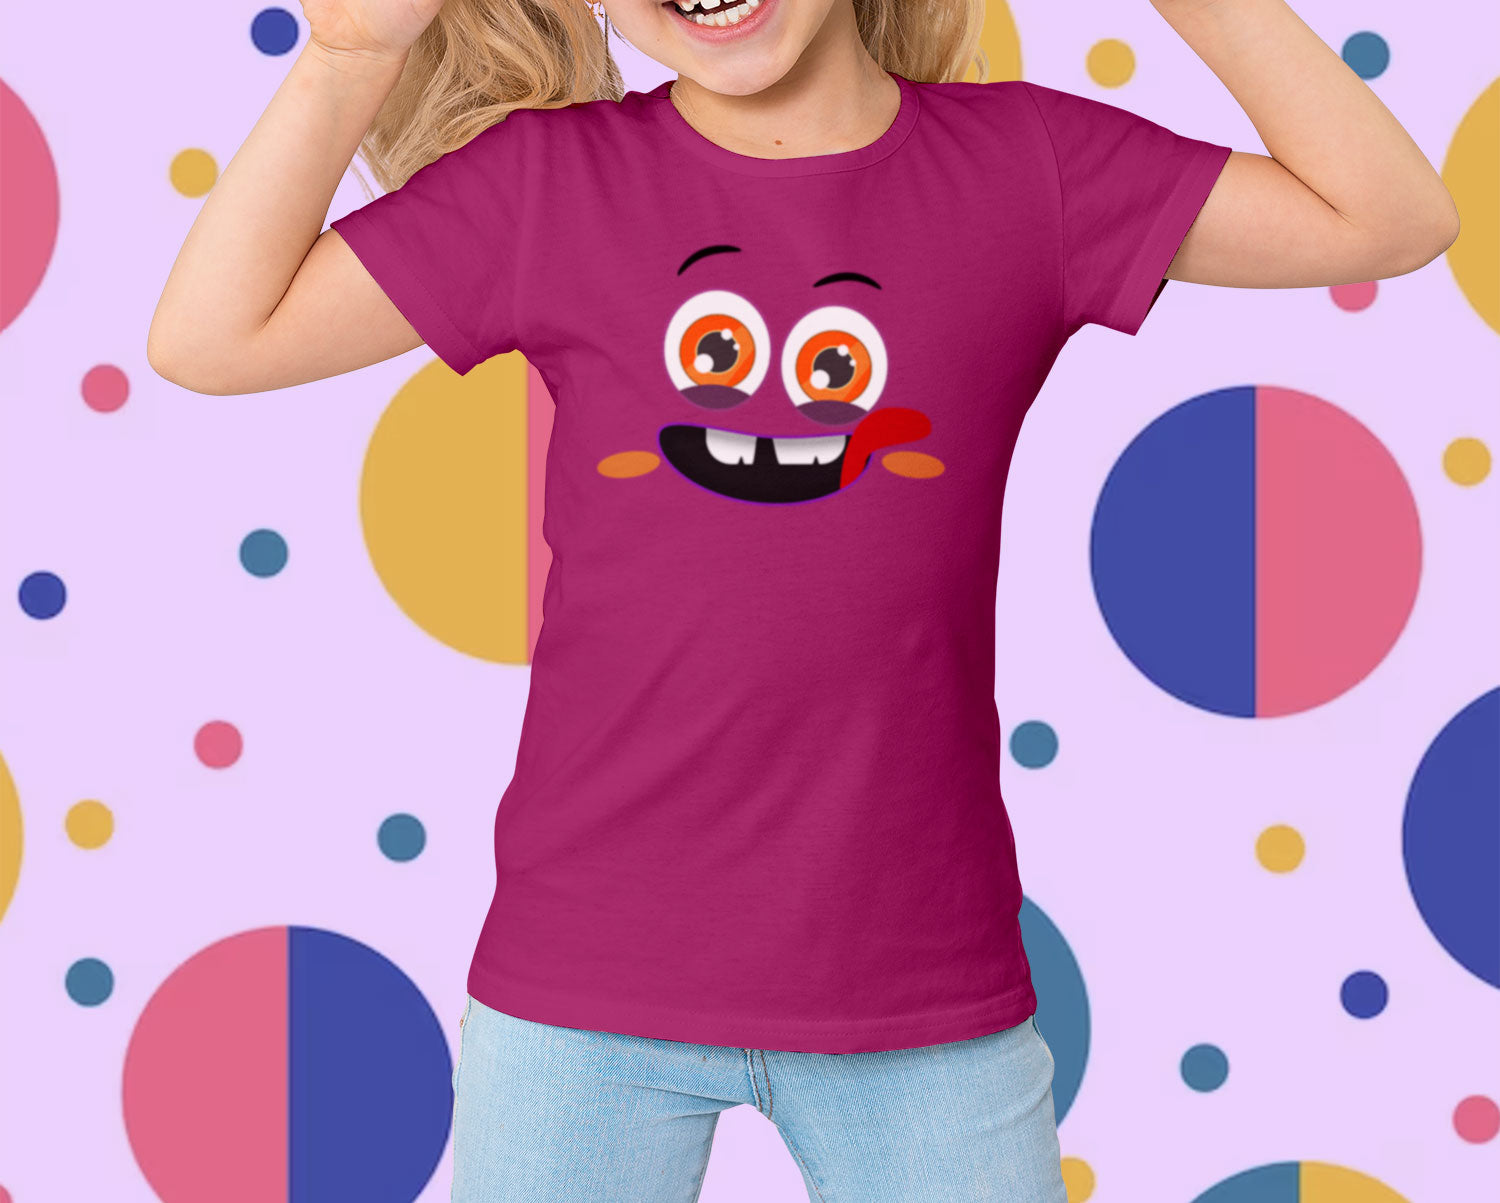 Clappy's Tongue-out Tumble Tee!